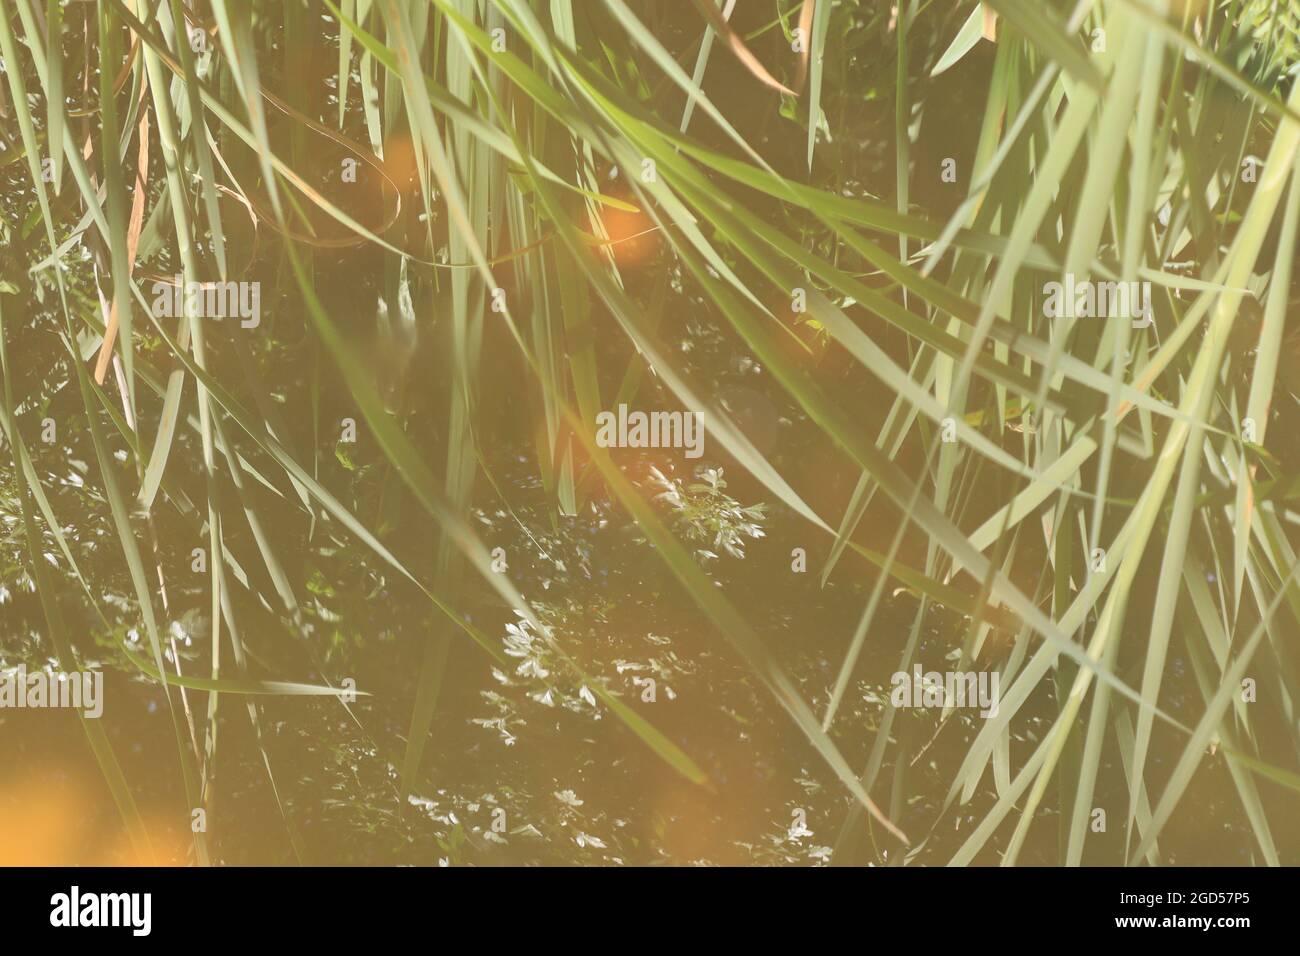 Reflection in water of messy reed bed Stock Photo